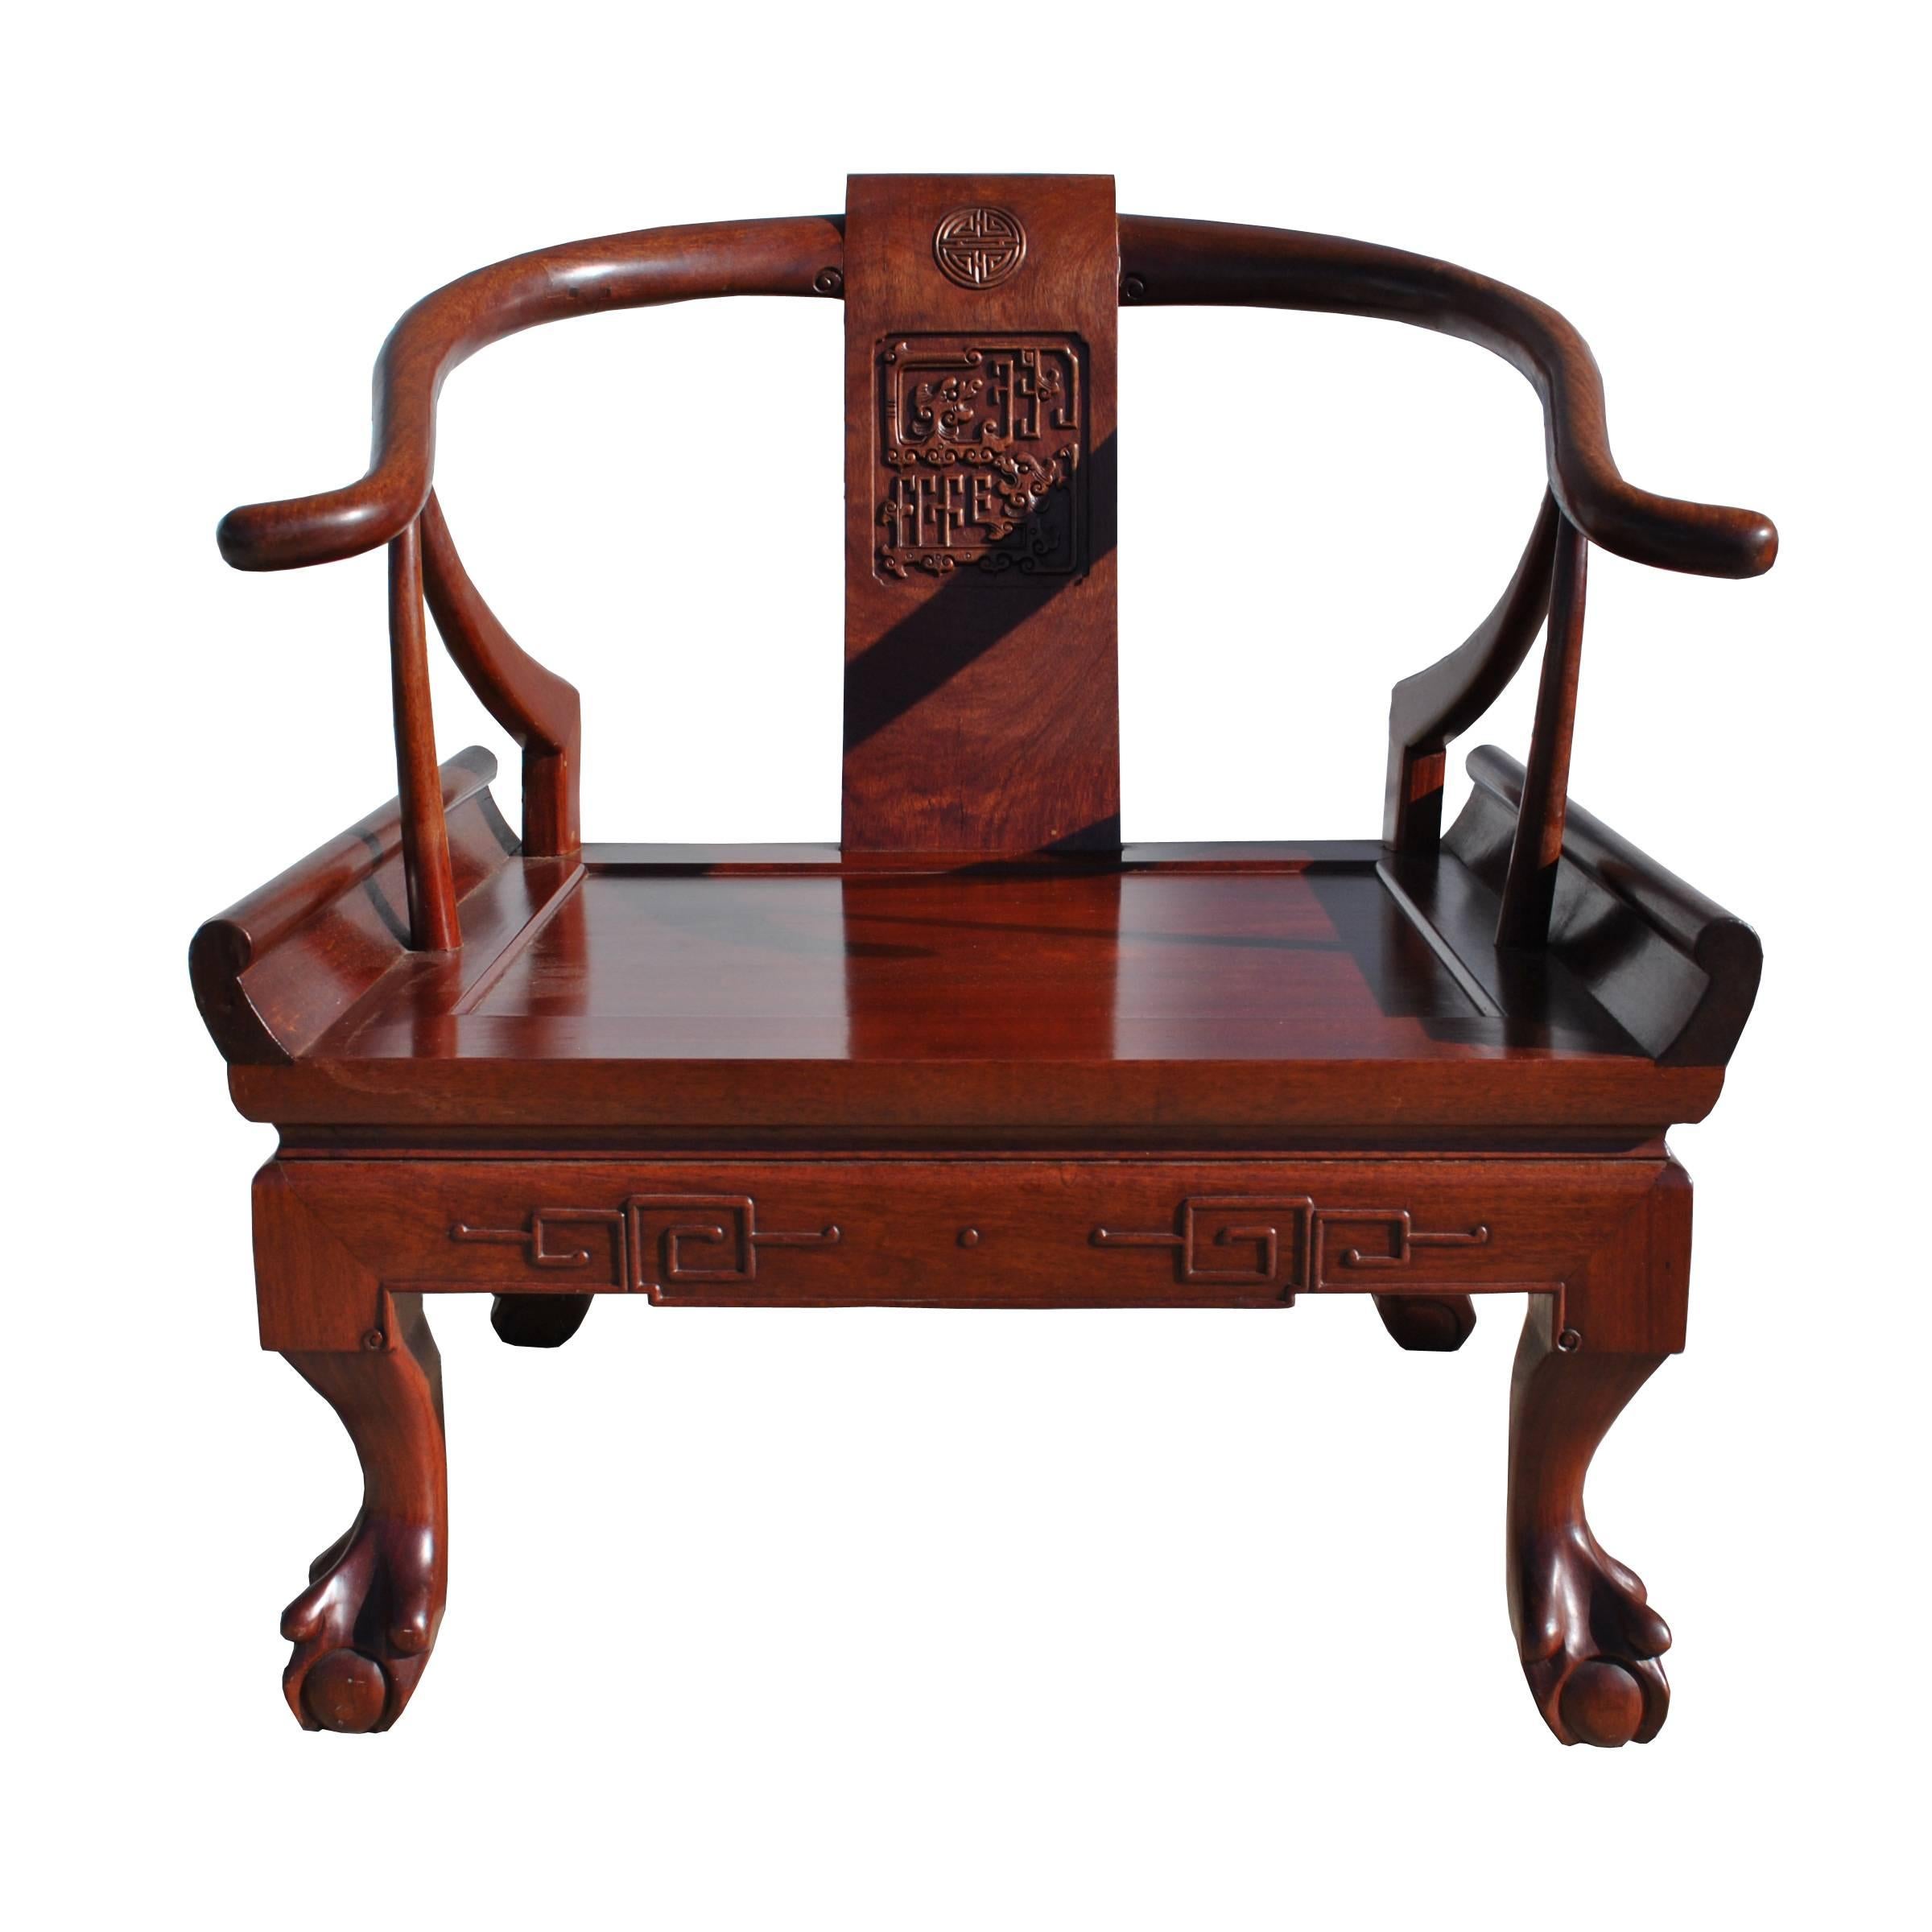 George Zee and Co
Hong Kong.
 

 Chinese Ming style horseshoe chair in rosewood
by George Zee and CO.
 
A contemporary rendition of the traditional Ming chair in rosewood.
Clawfoot and ball with horseshoe arching back.
Embellished with